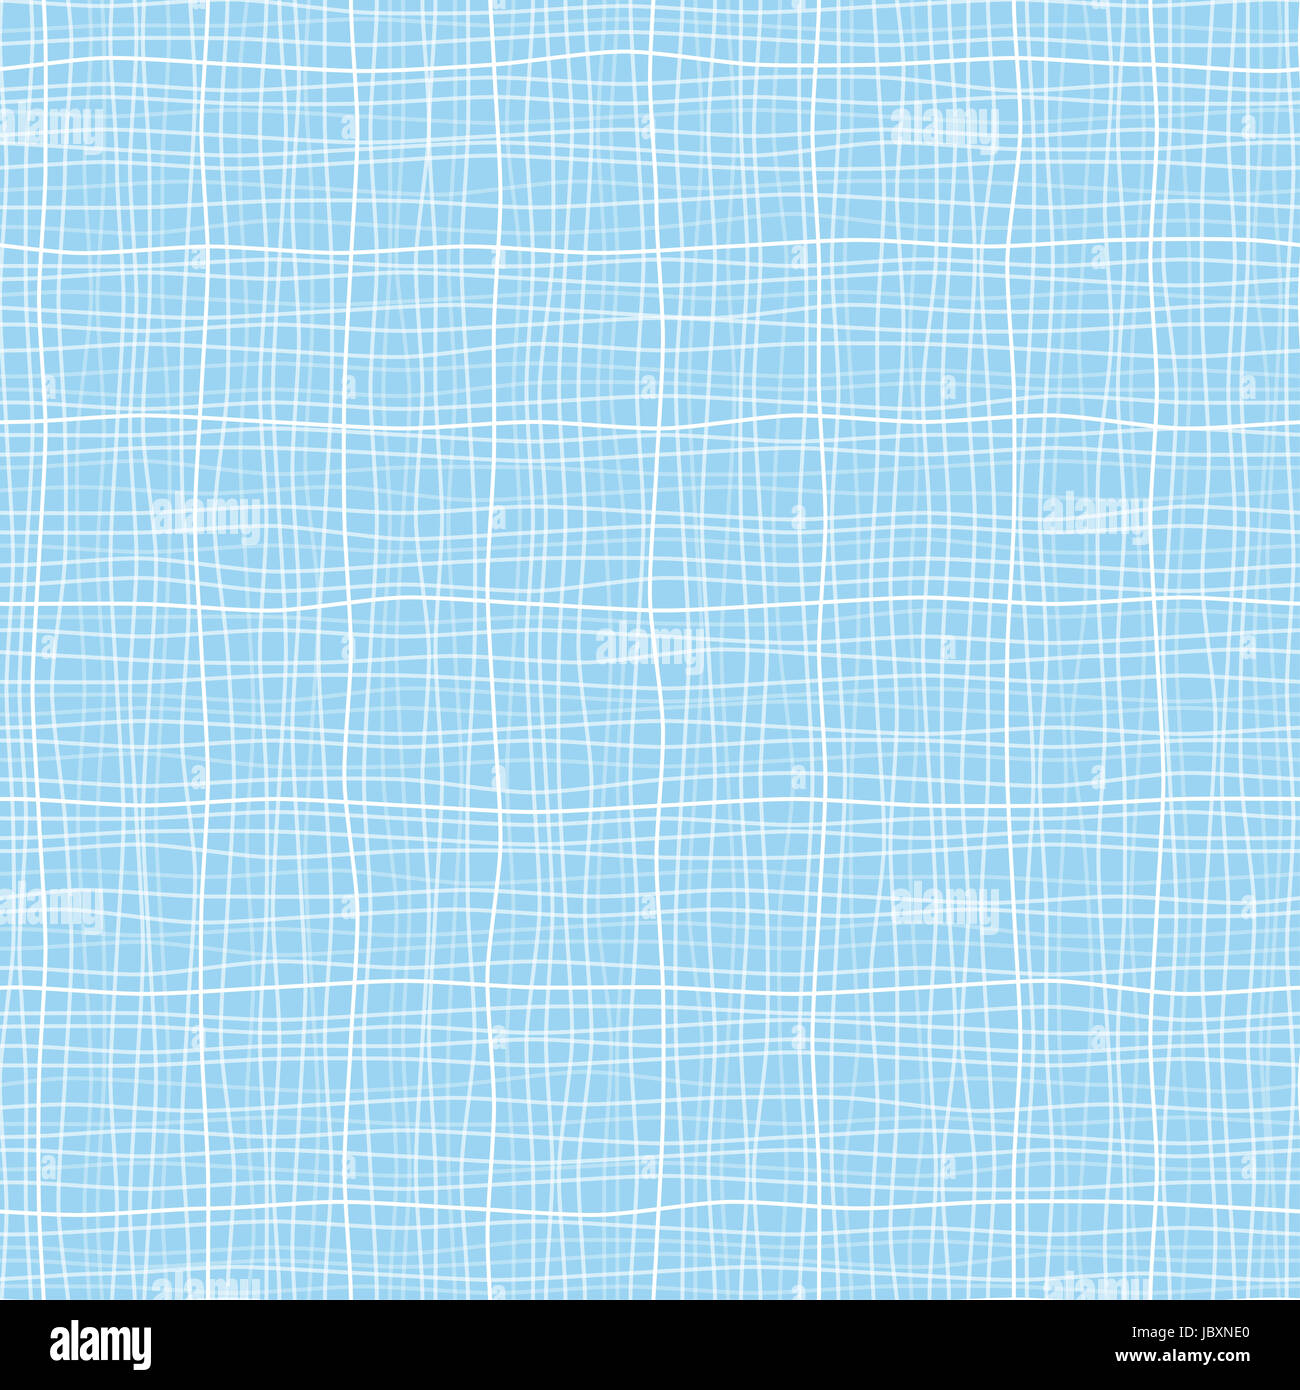 seamless blue colored abstract background vector illustration Stock Photo